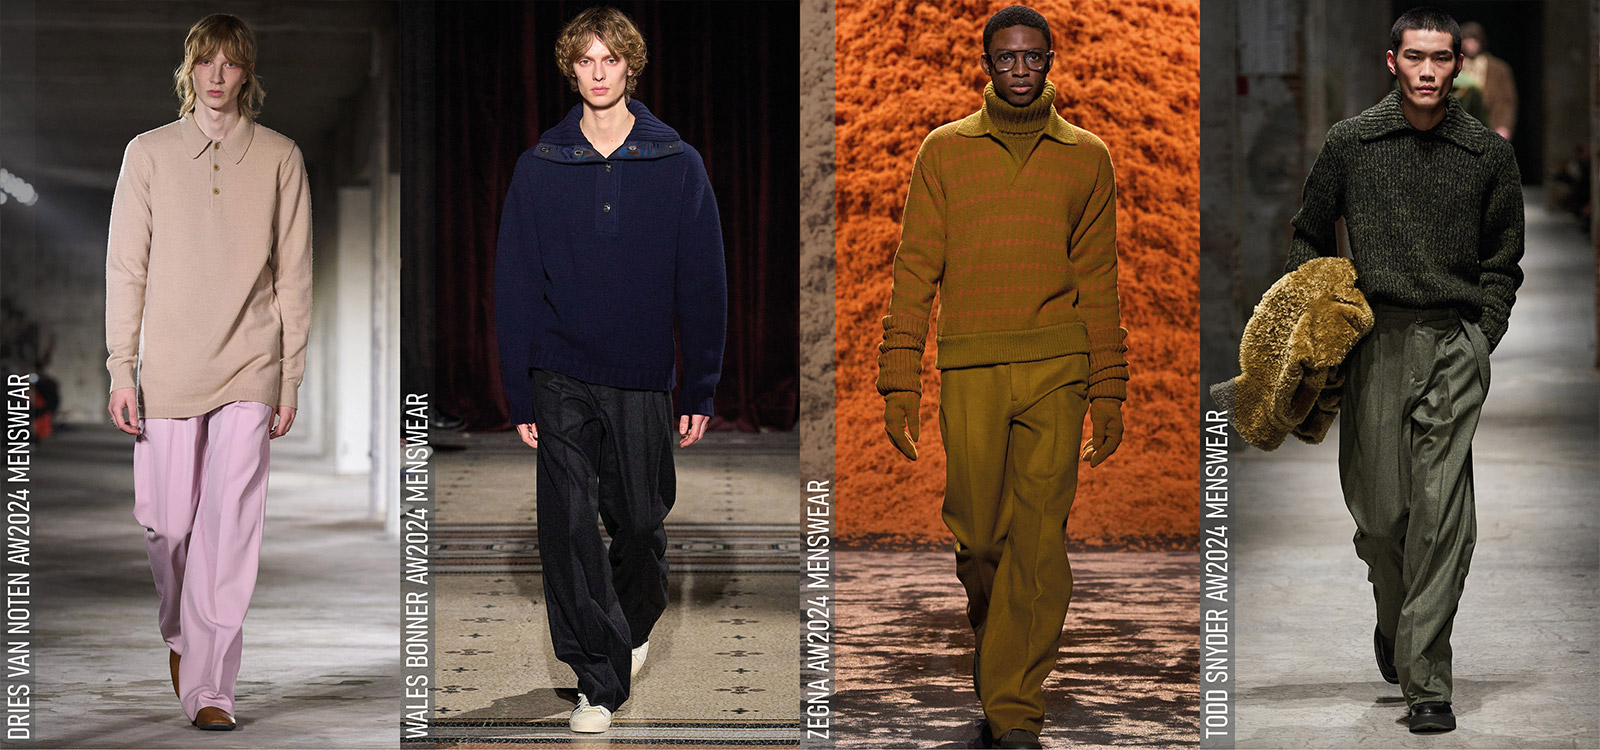 Grandpacore Polos at Dries Van Noten, Wales Bonner, Zegna, Todd Snyder